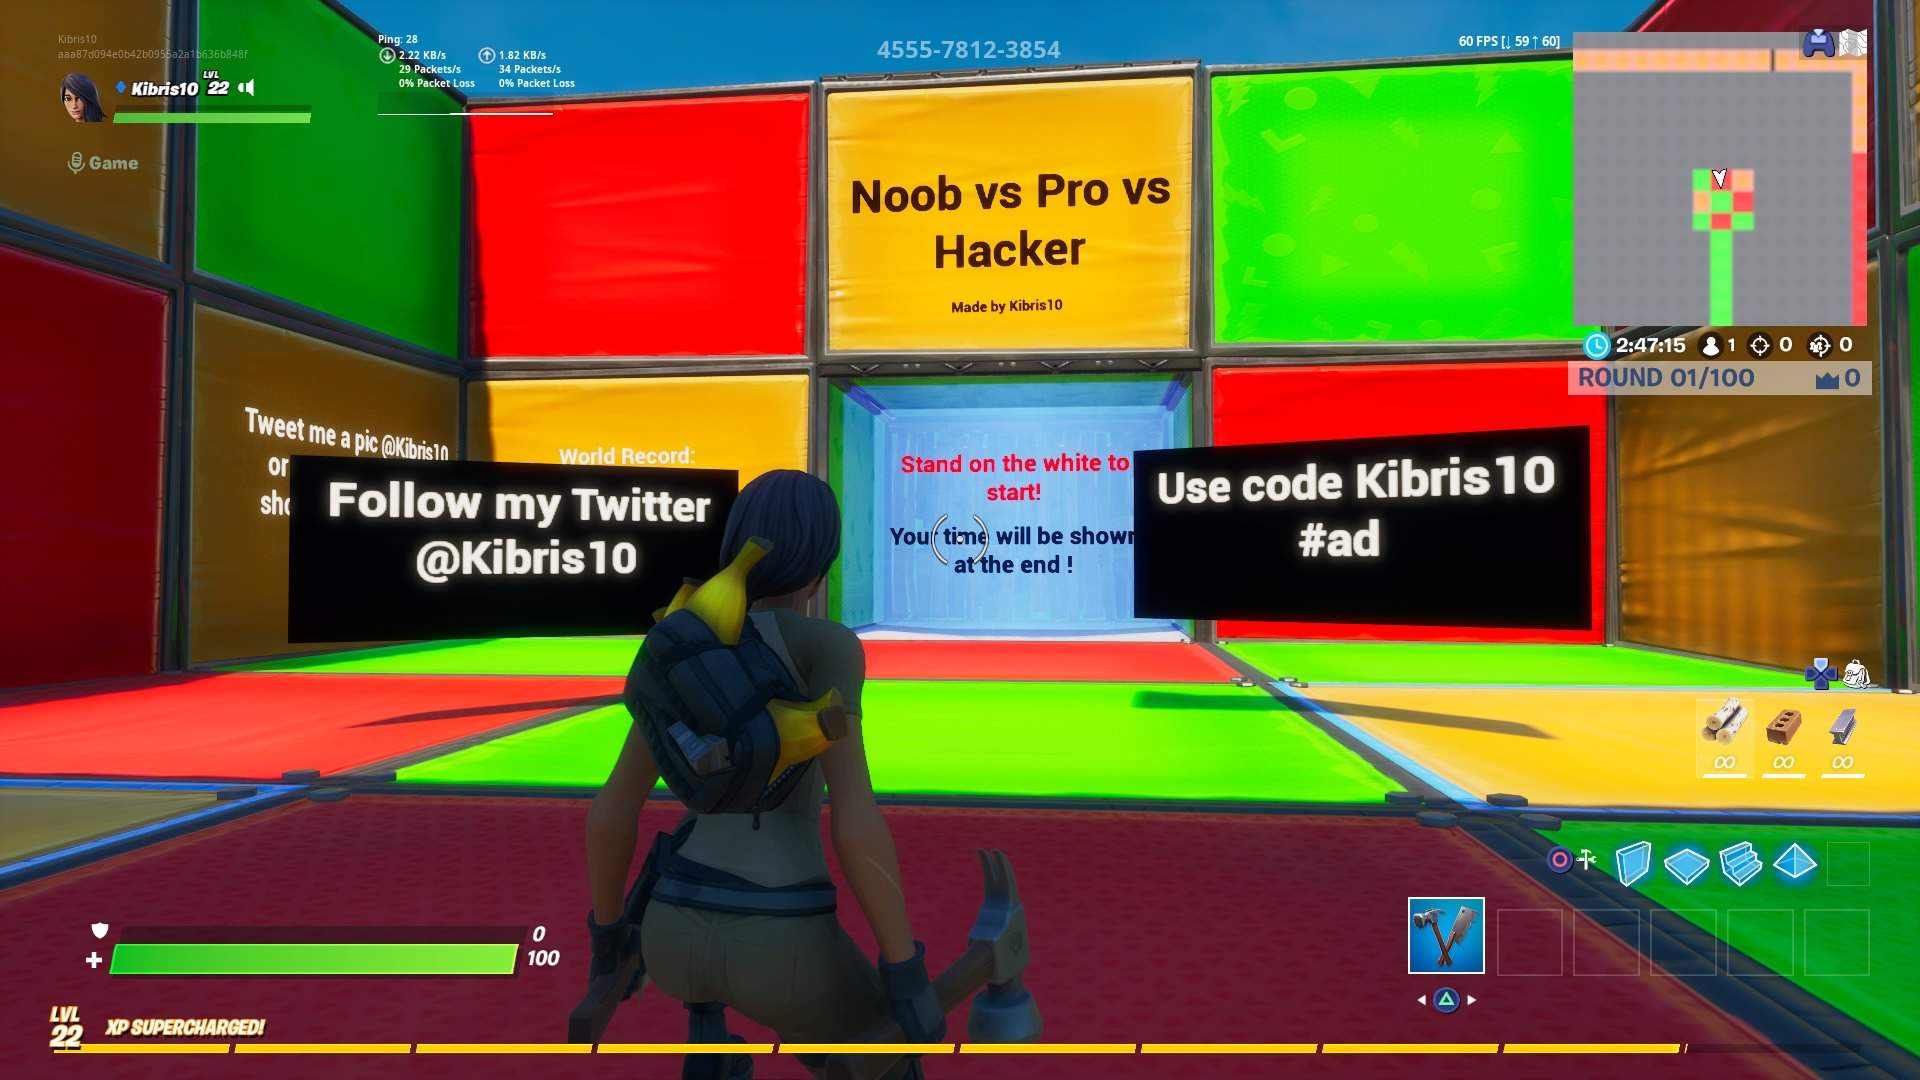 10 Types of Noobs in Roblox! (2021) 